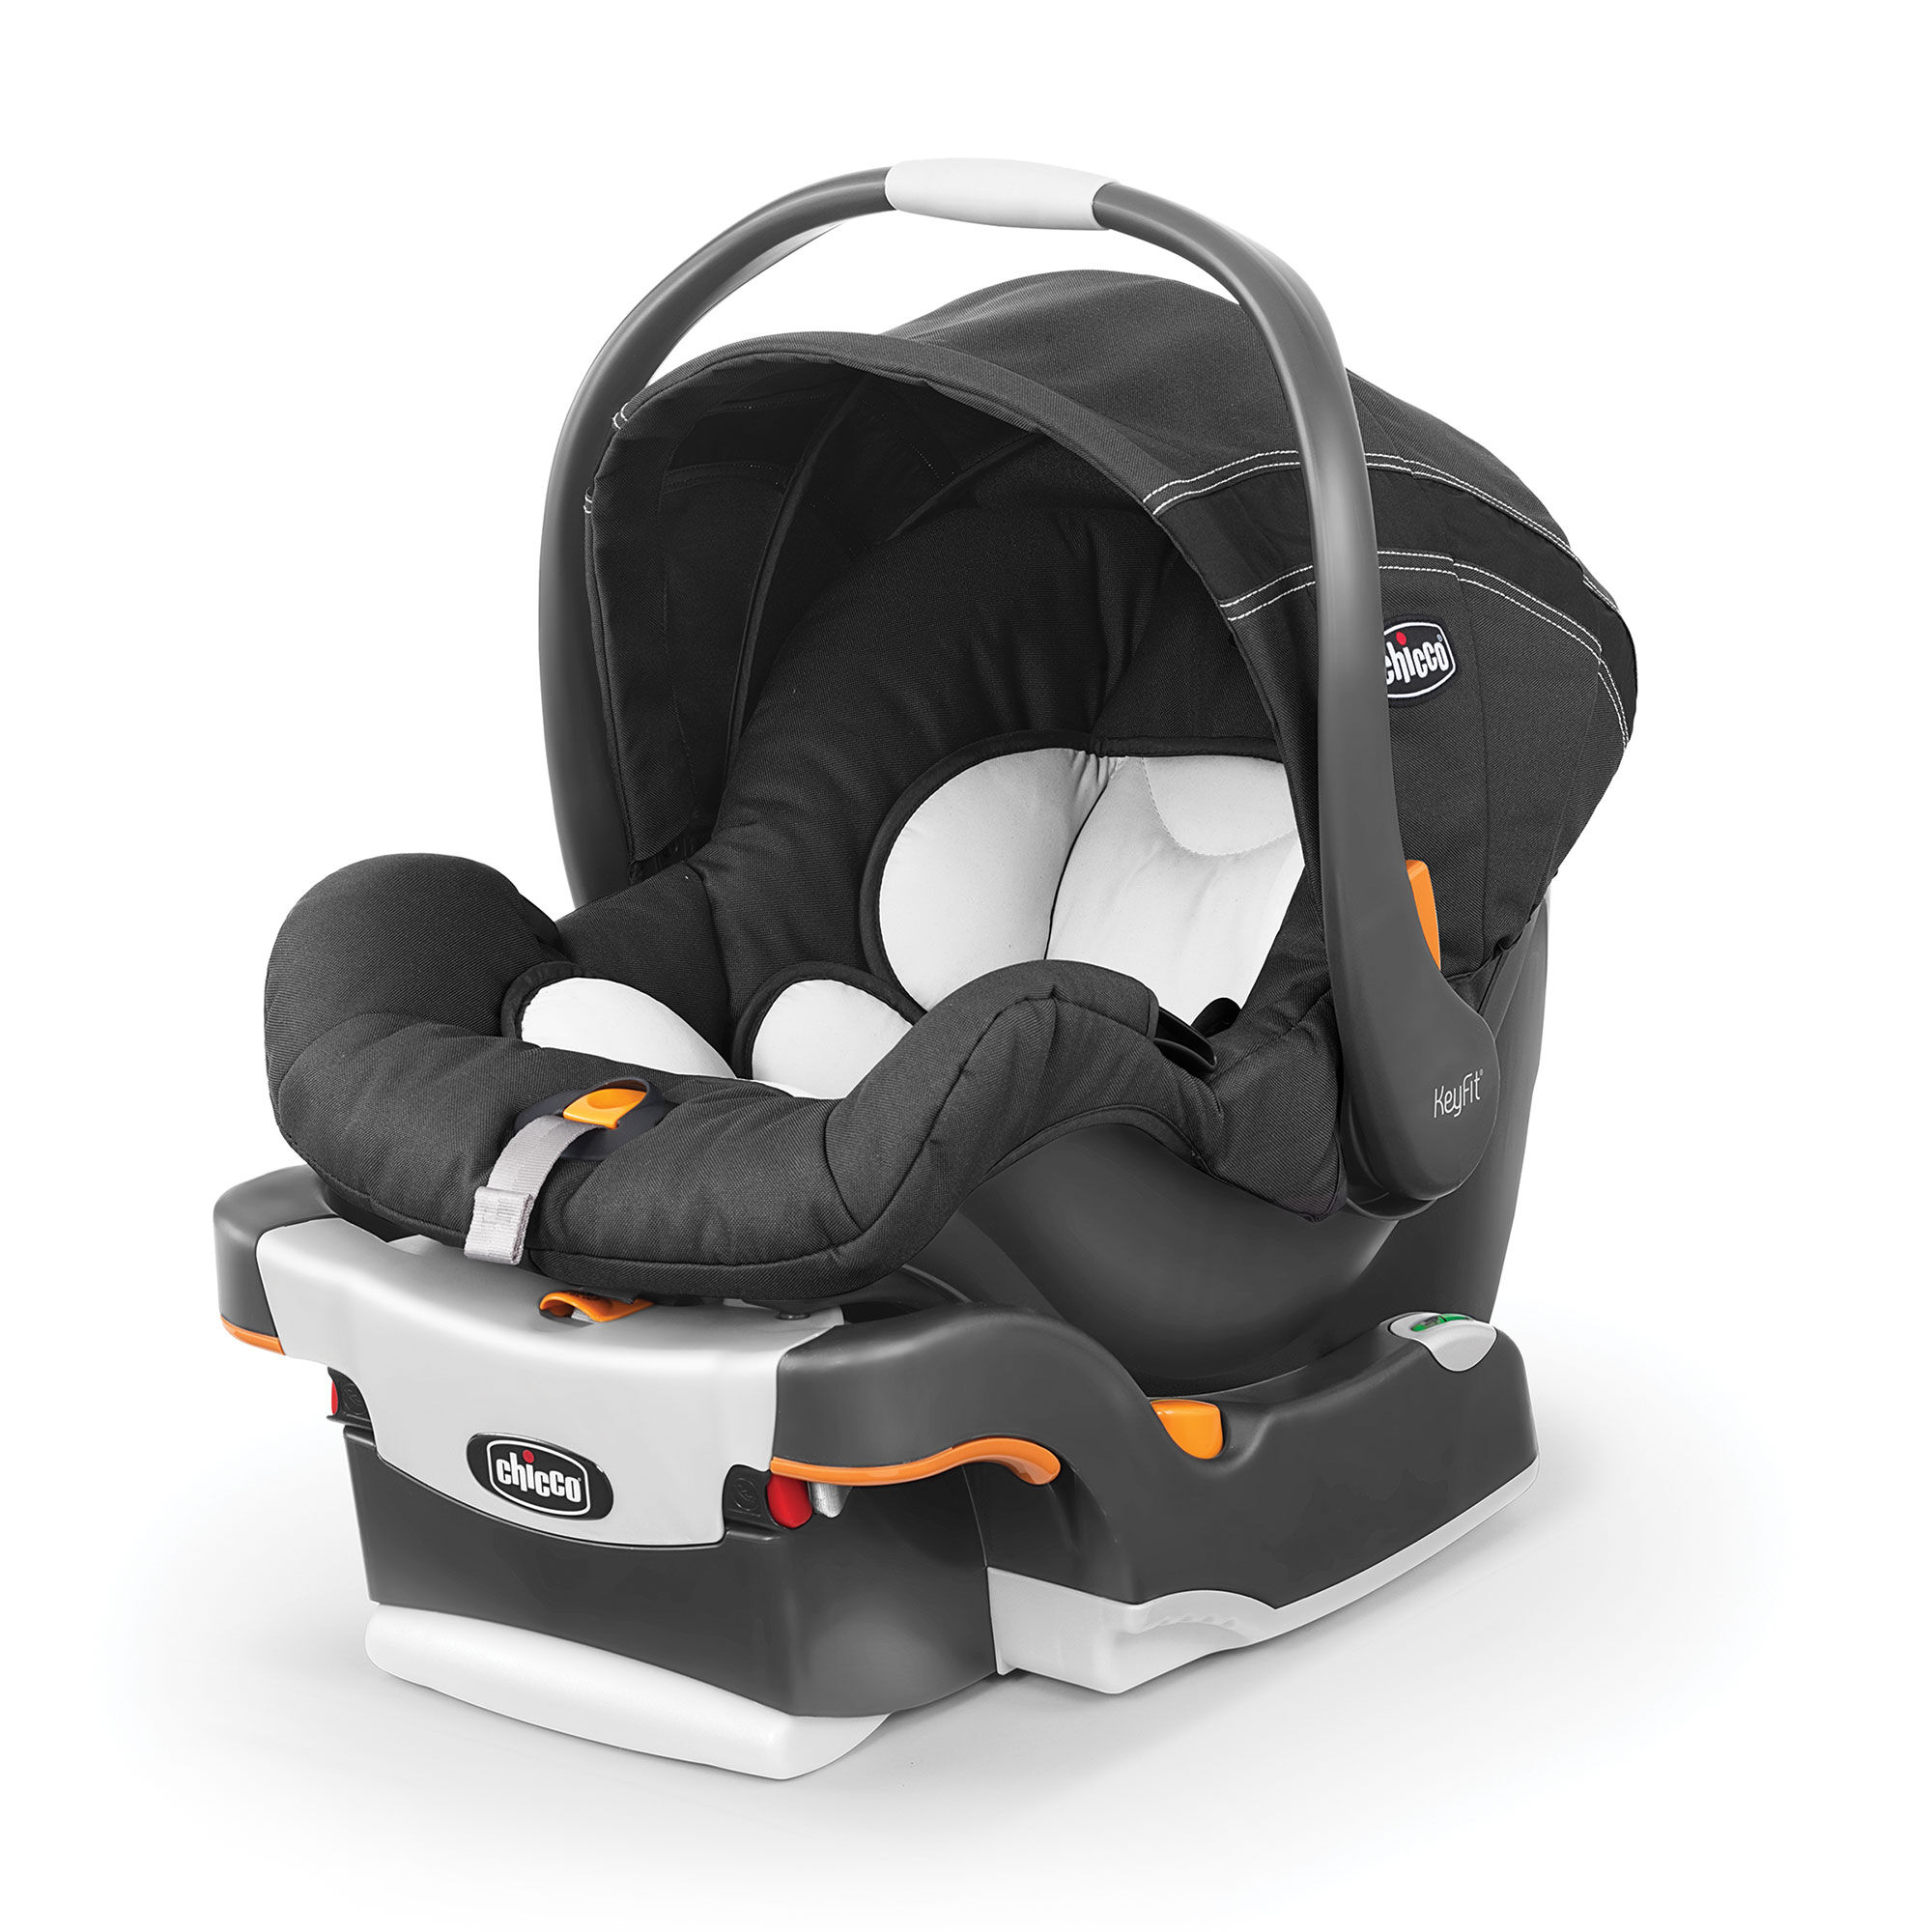 https://www.chiccousa.com/dw/image/v2/AAMT_PRD/on/demandware.static/-/Sites-chicco_catalog/default/dwba52ca5f/images/products/Gear/keyfit30/chicco-keyfit-infant-car-seat-encore.jpg?sw=2000&sh=2000&sm=fit